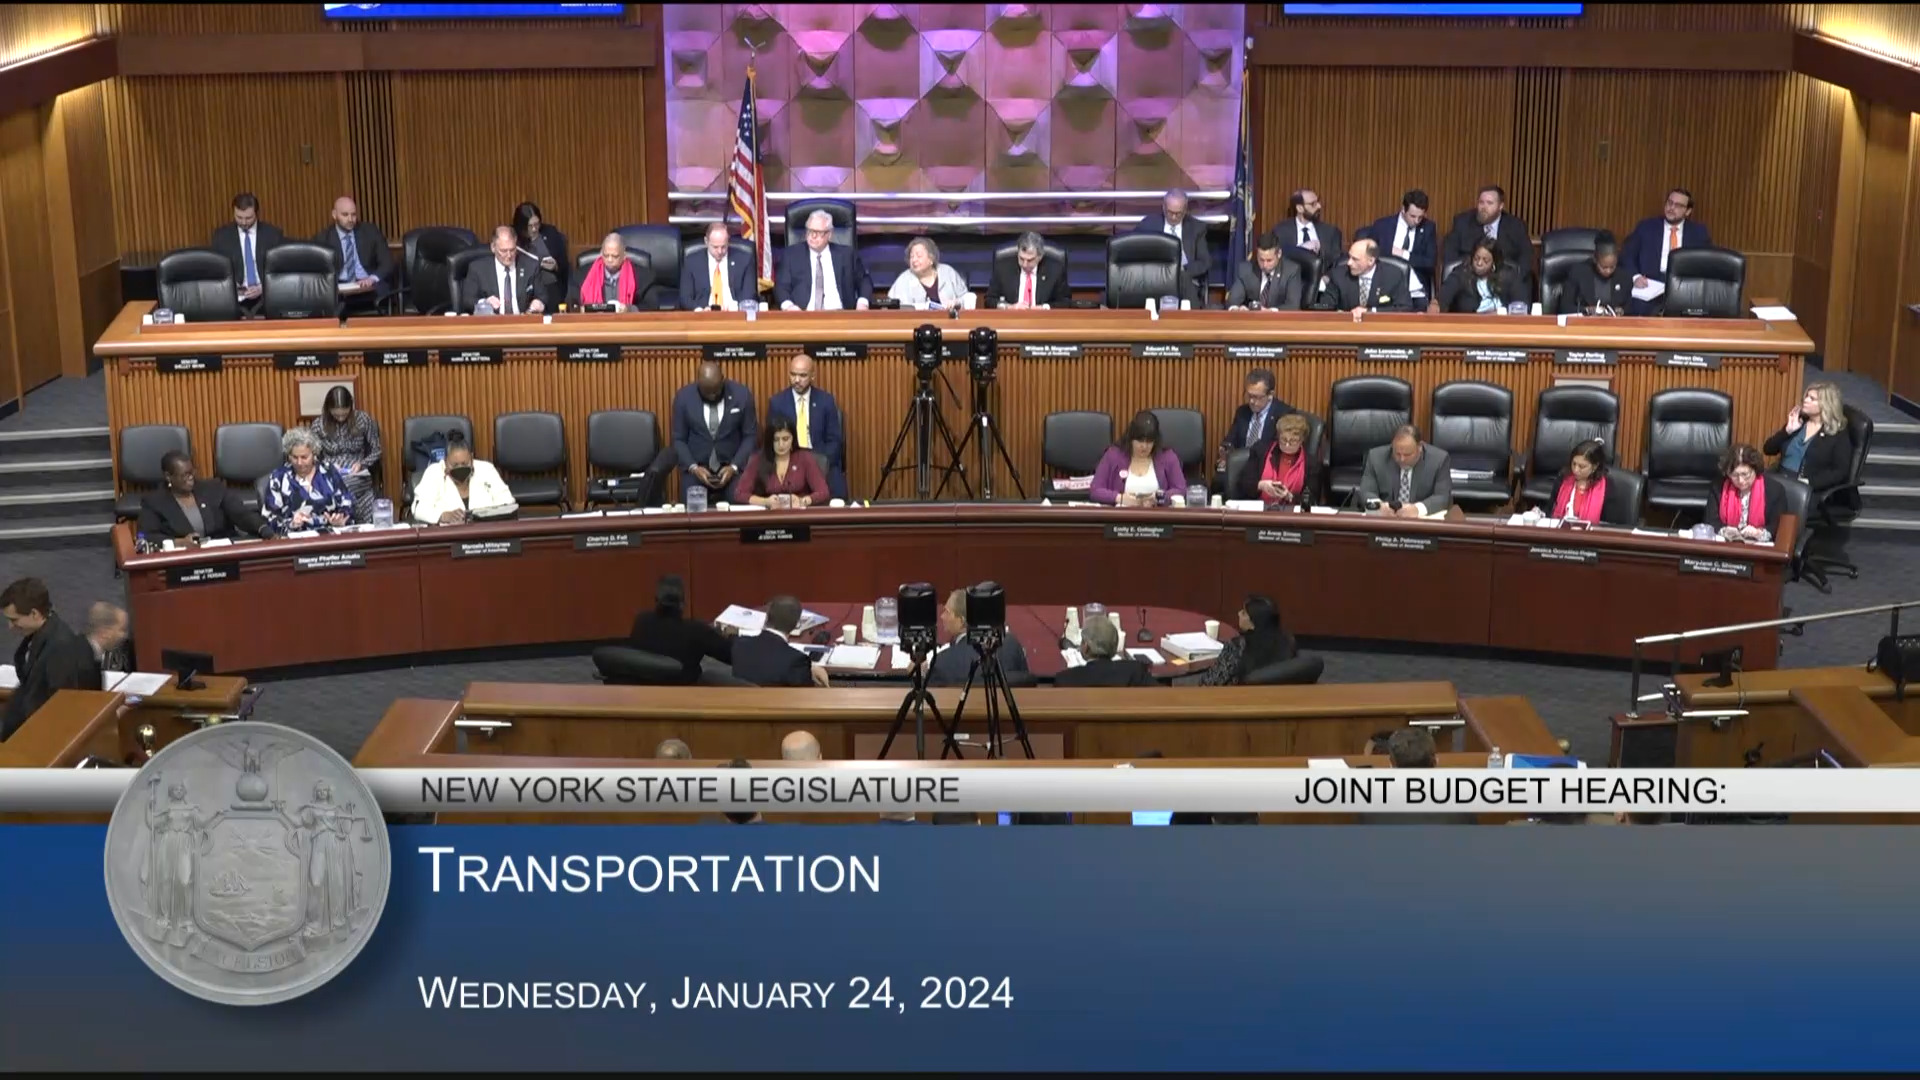 MTA Chairman Testifies During Joint Budget Hearing on Transportation